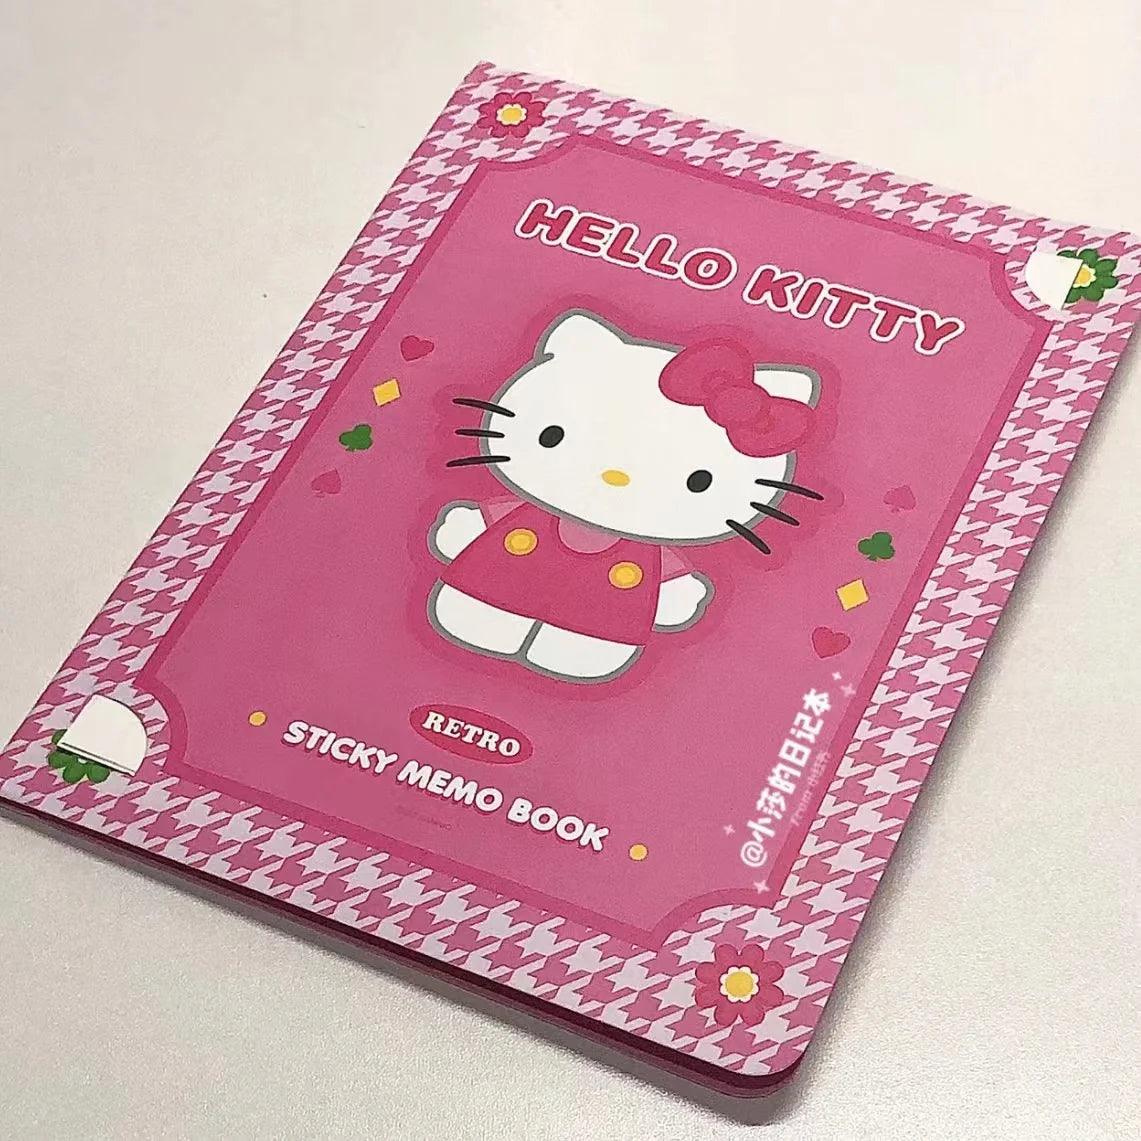 Kawaii Sanrio Hello Kitty Character Notebook Set for Students and Offices  ourlum.com   